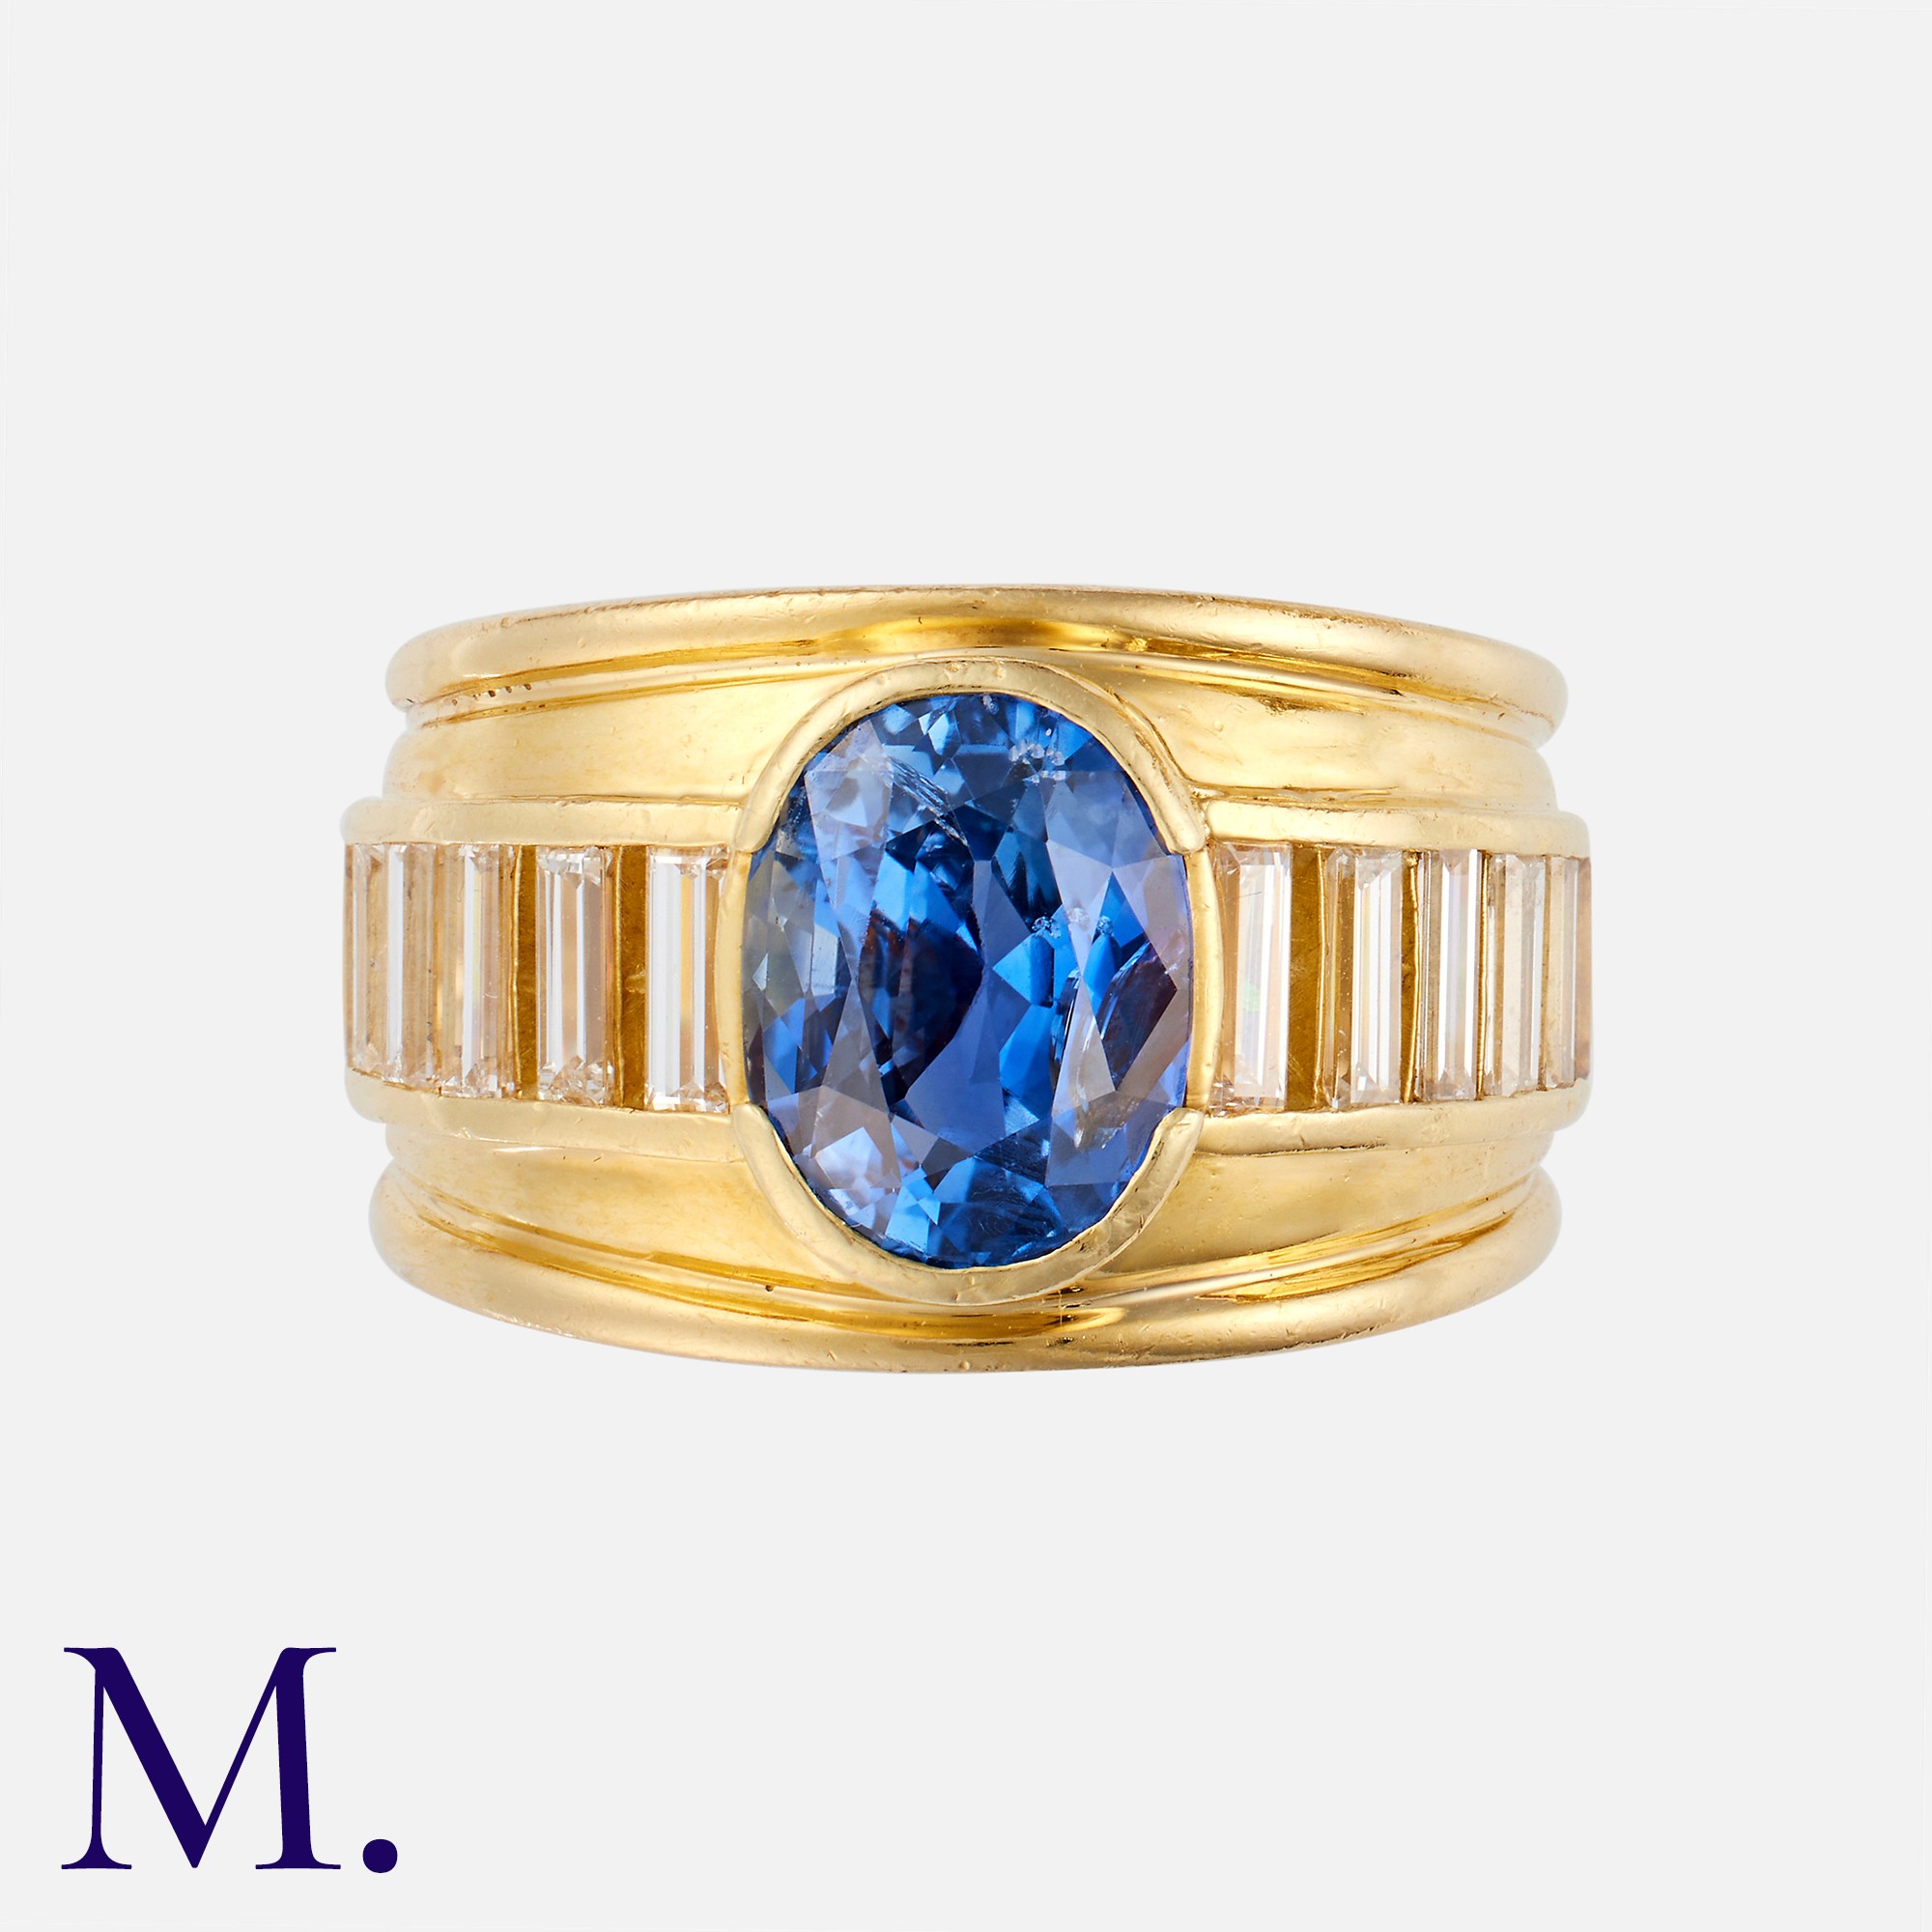 A Sapphire & Diamond Ring in 18K yellow gold, set with an oval-cut sapphire accompanied by a